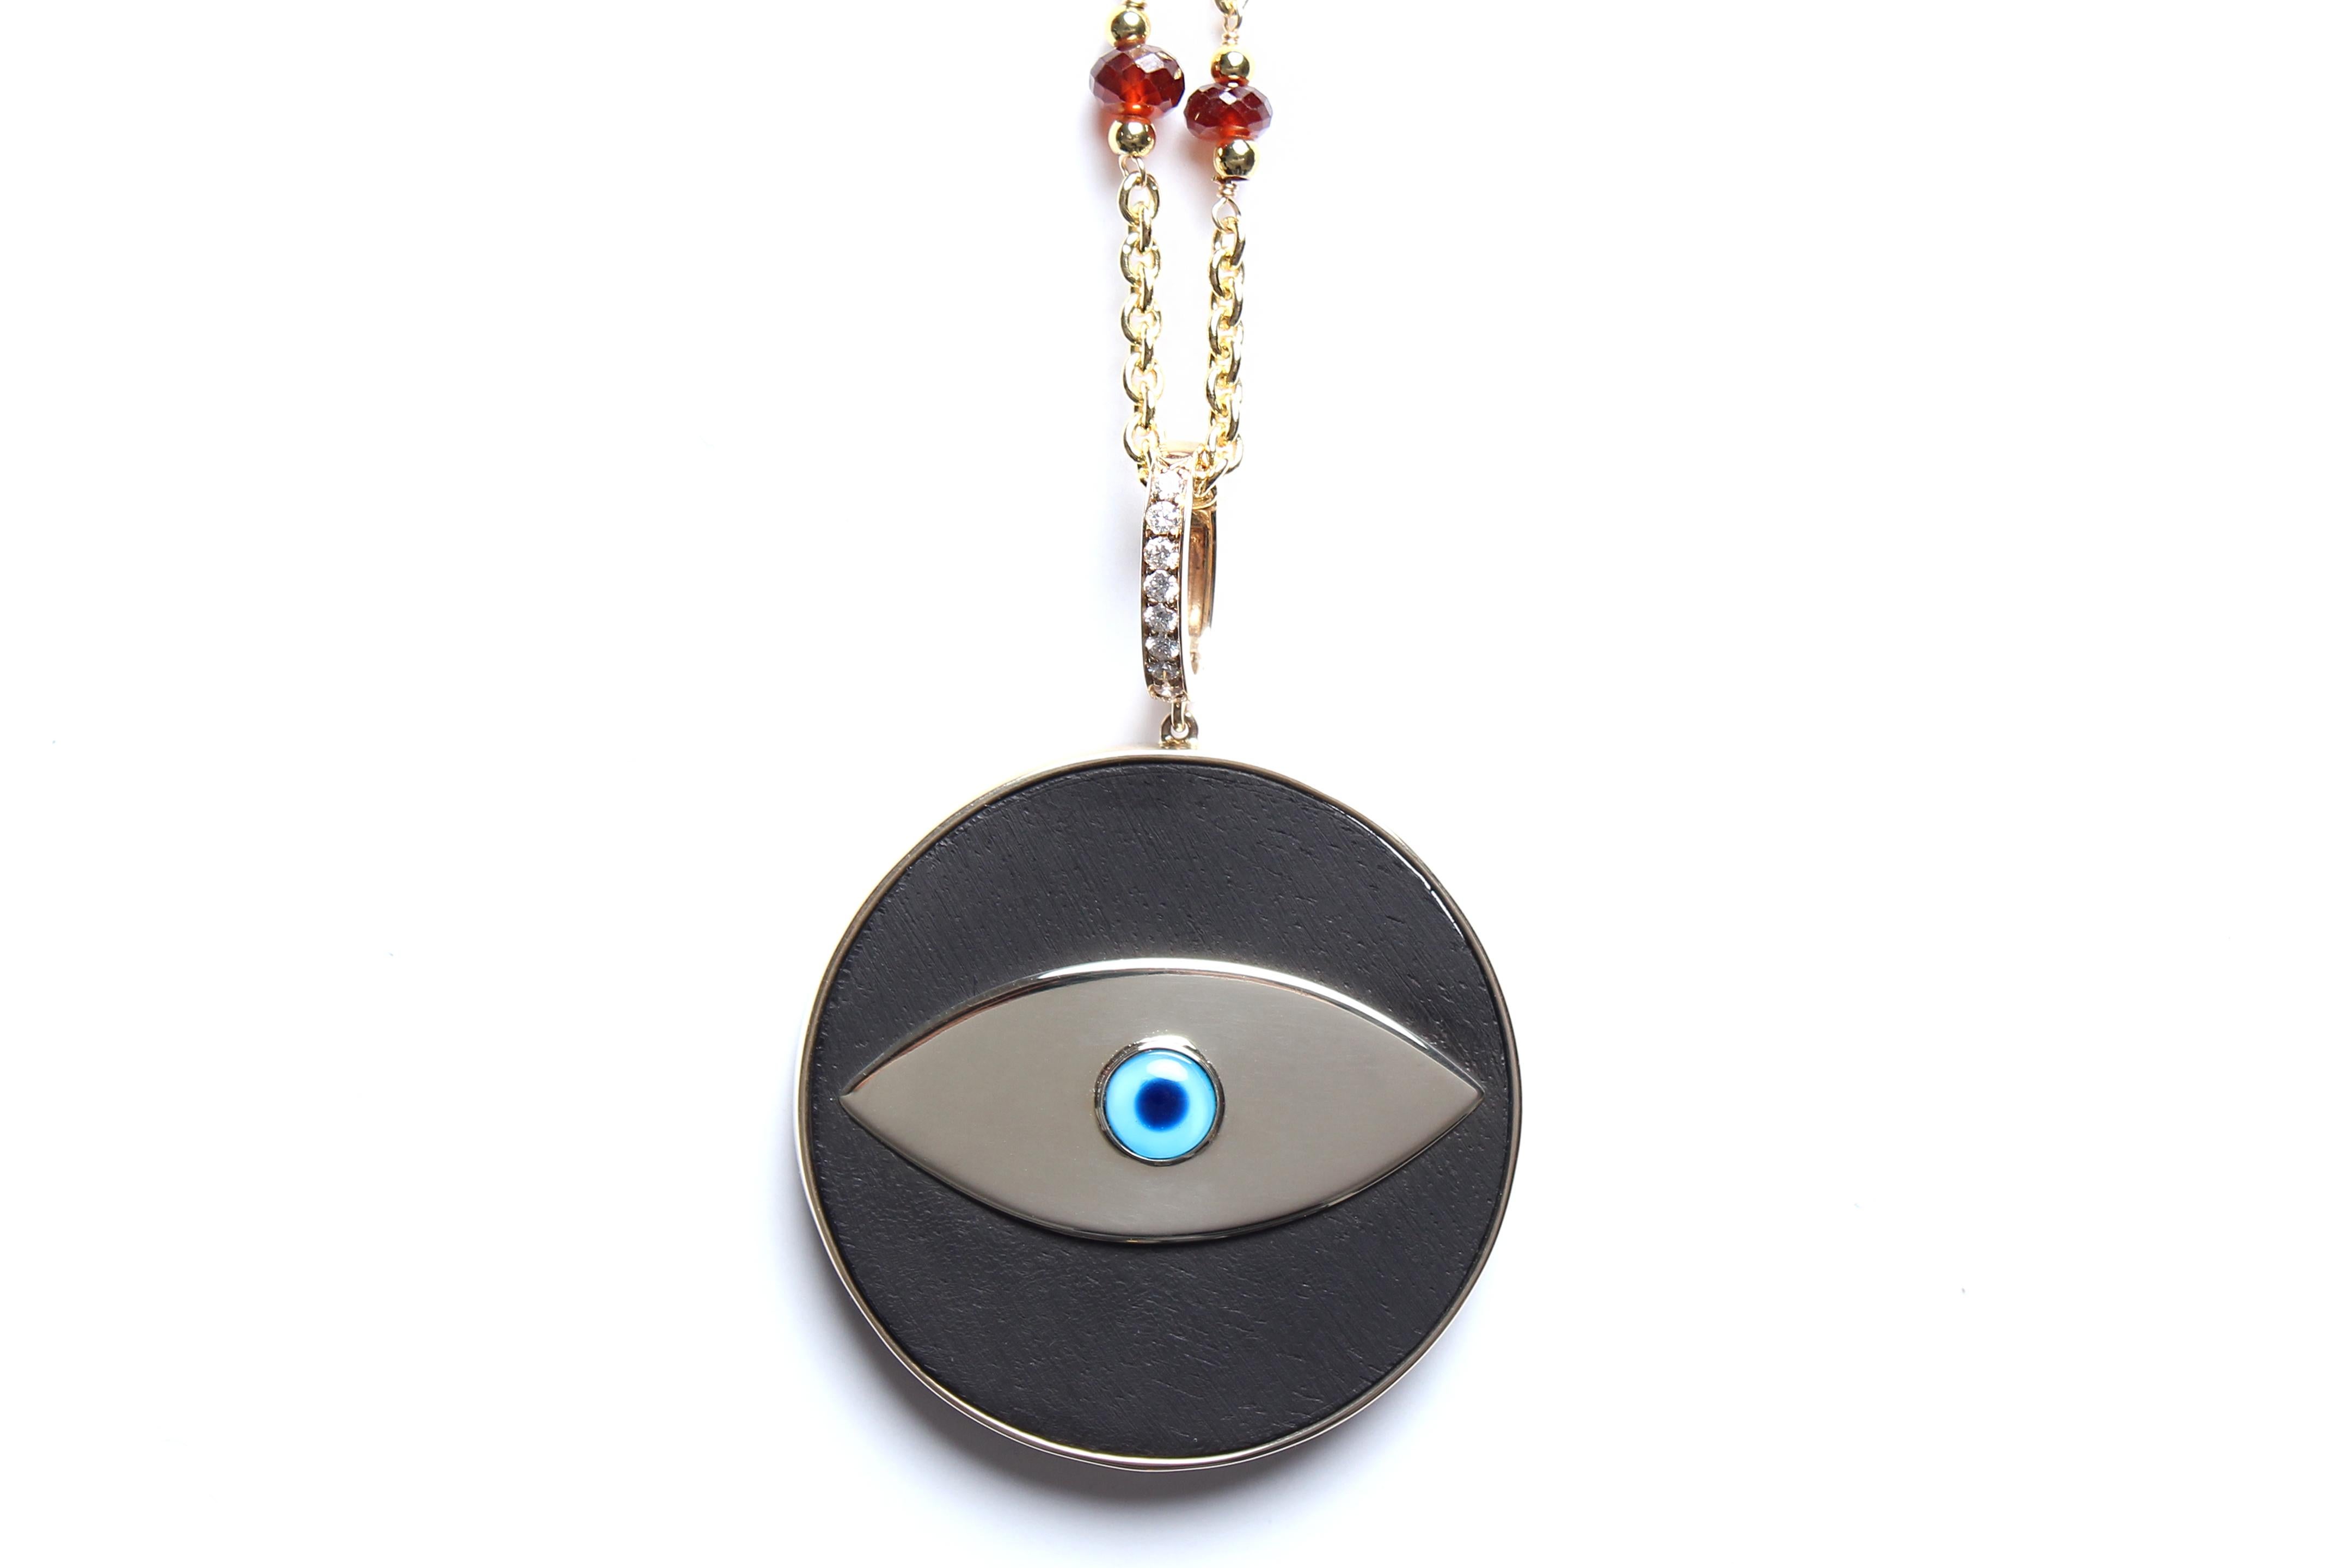 Clarissa Bronfman Signature 18k Peridot Caracas Ebony Evil Eye Pendant Chain In New Condition For Sale In New York, NY